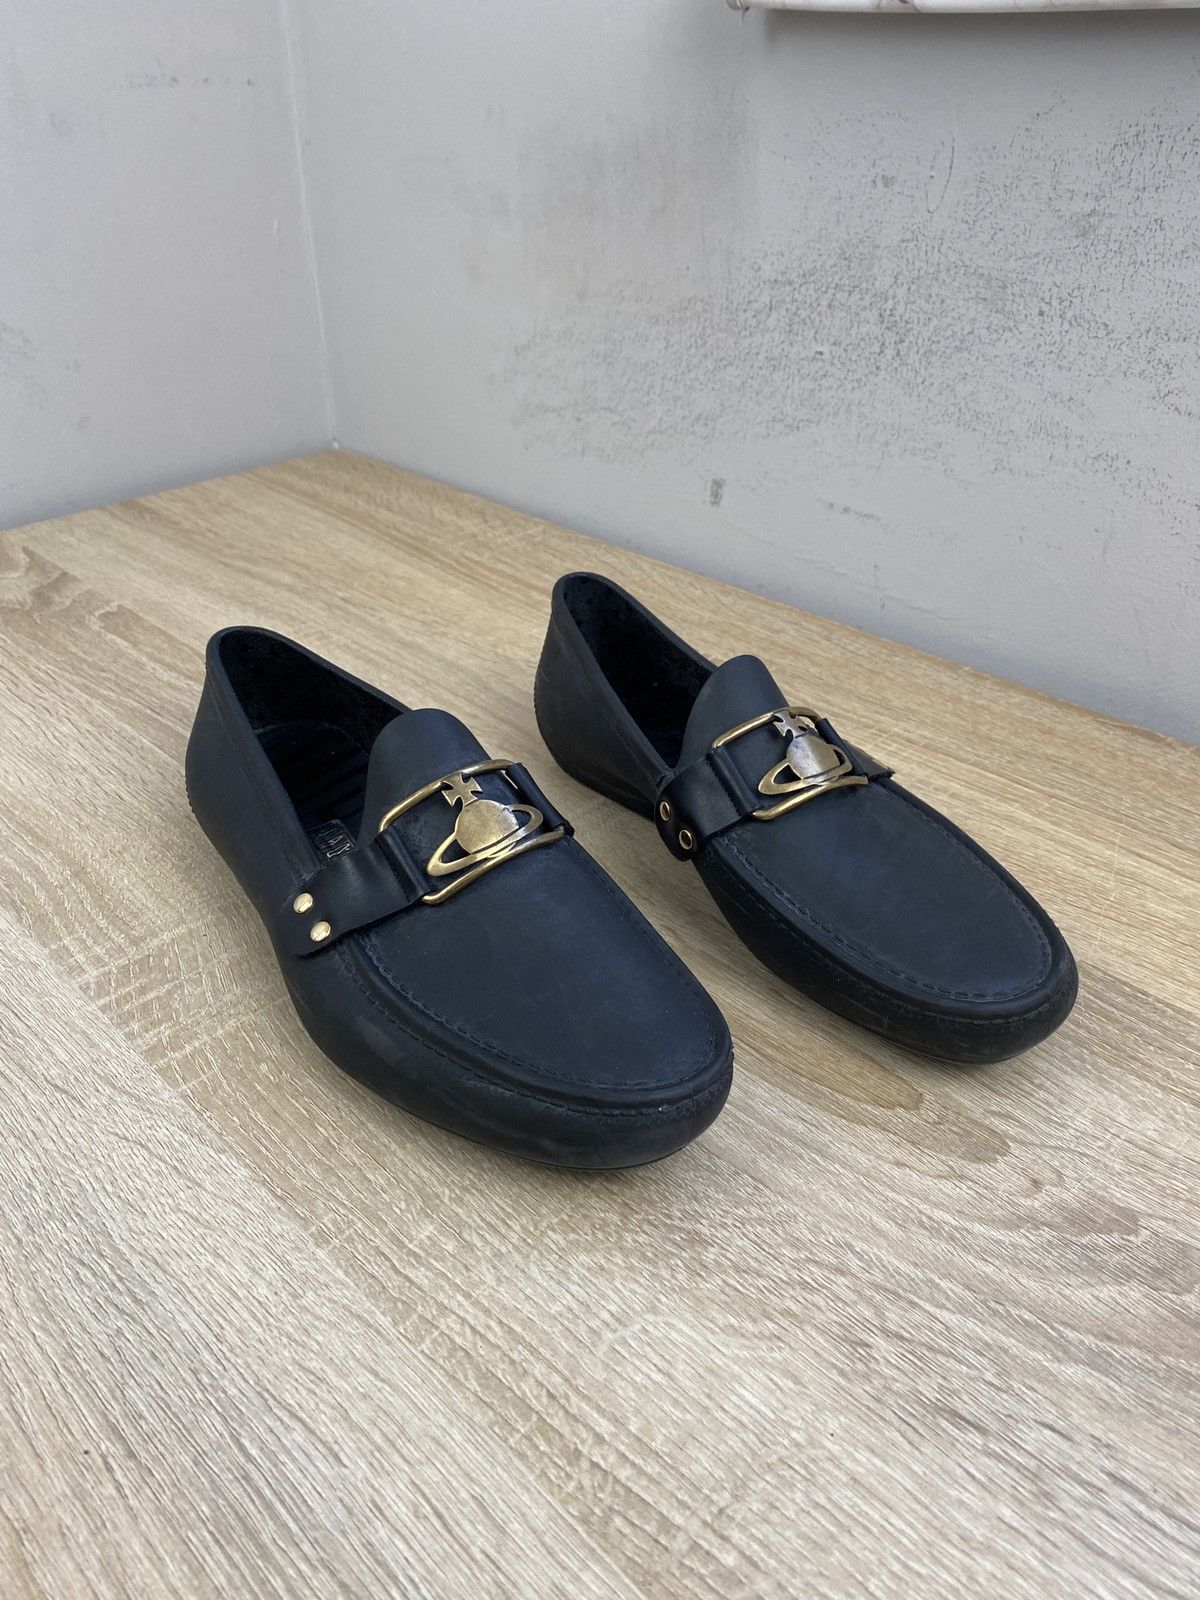 Vivienne Westwood Loafers | Grailed